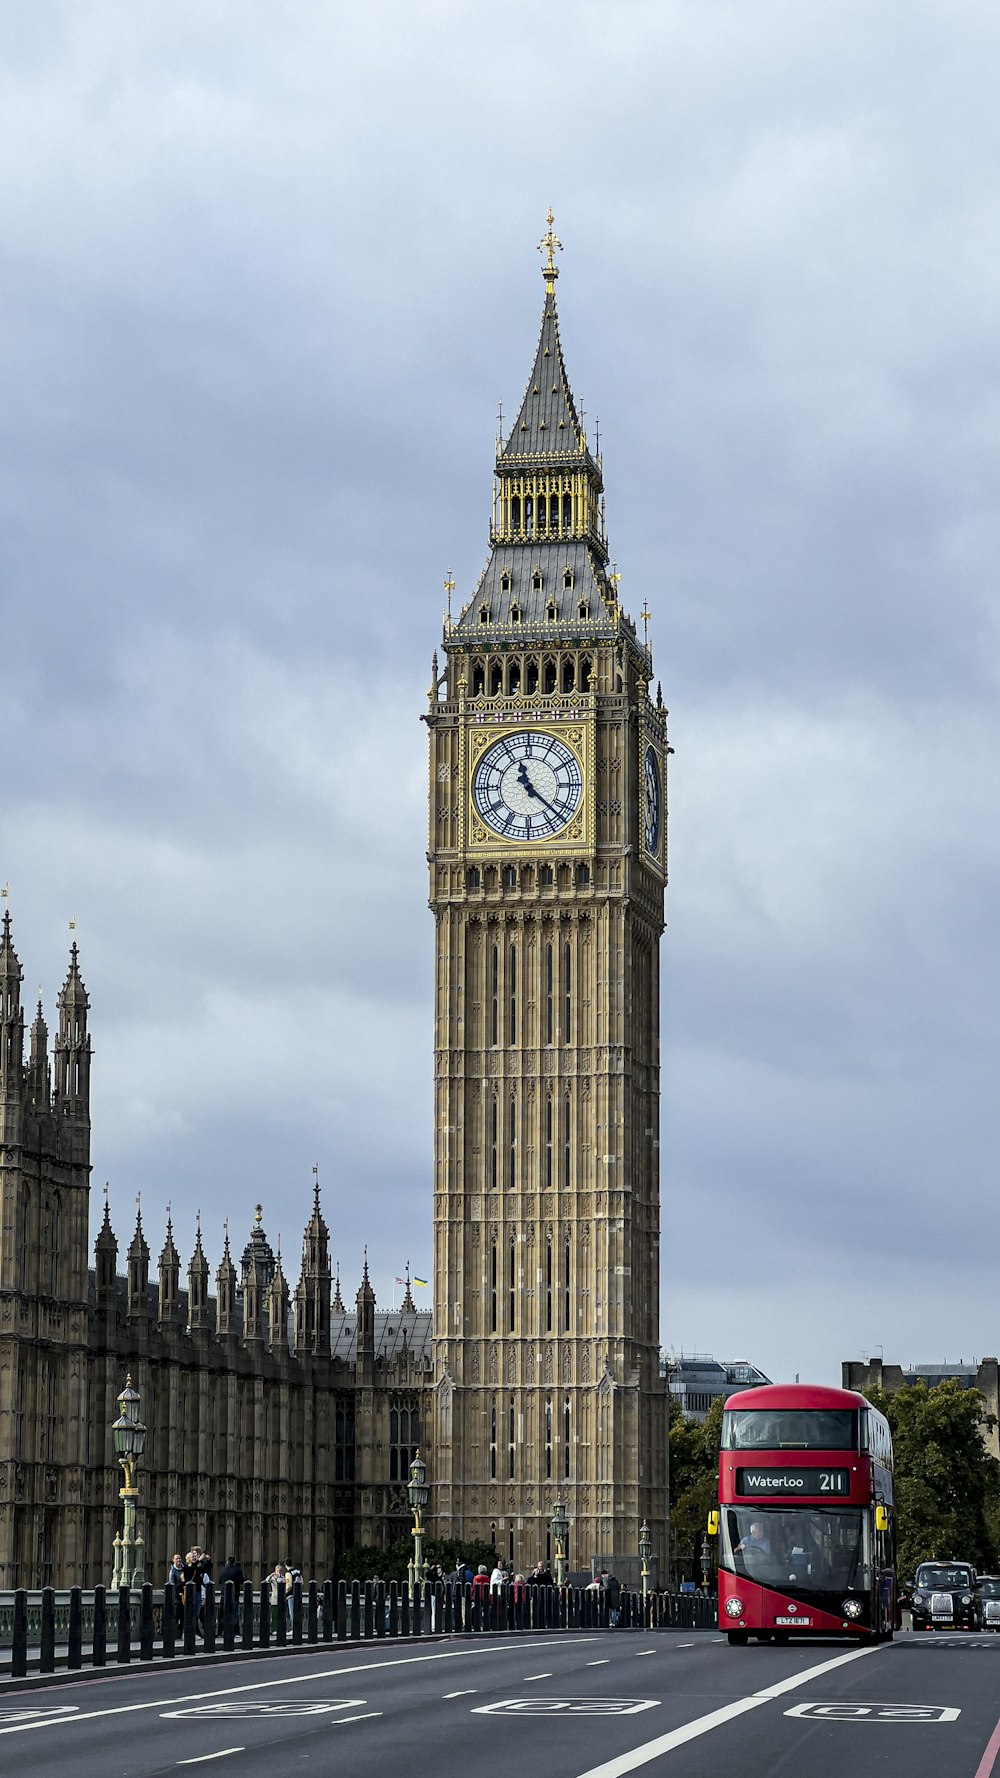 a large clock tower stands tall with Big Ben in the background